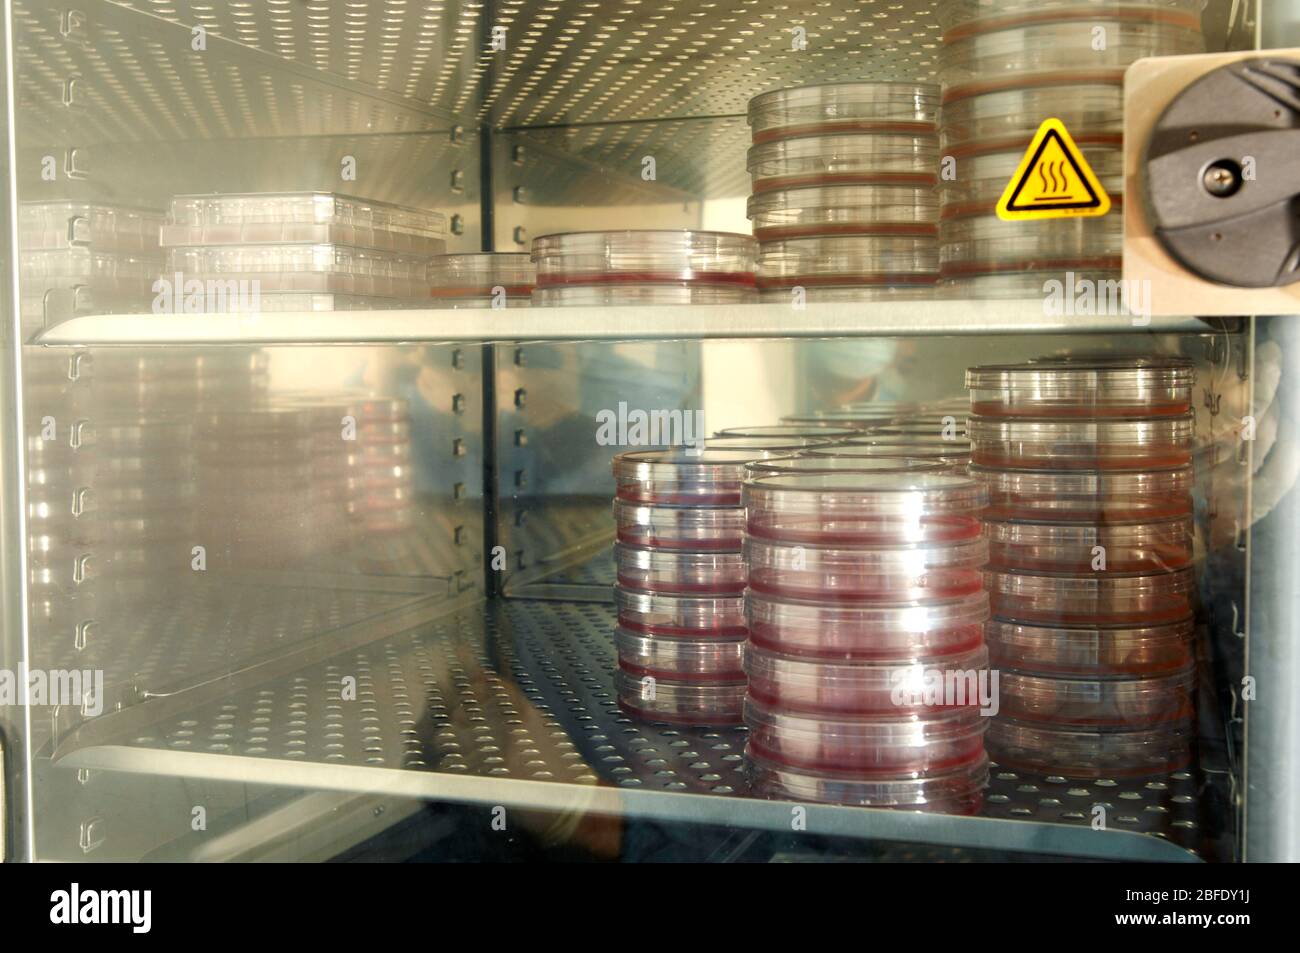 A batch of induced puripotent stem cells are cooled down after incubation for 8 days at 37 degrees centigrade before being deep frozen in liquid nitog Stock Photo